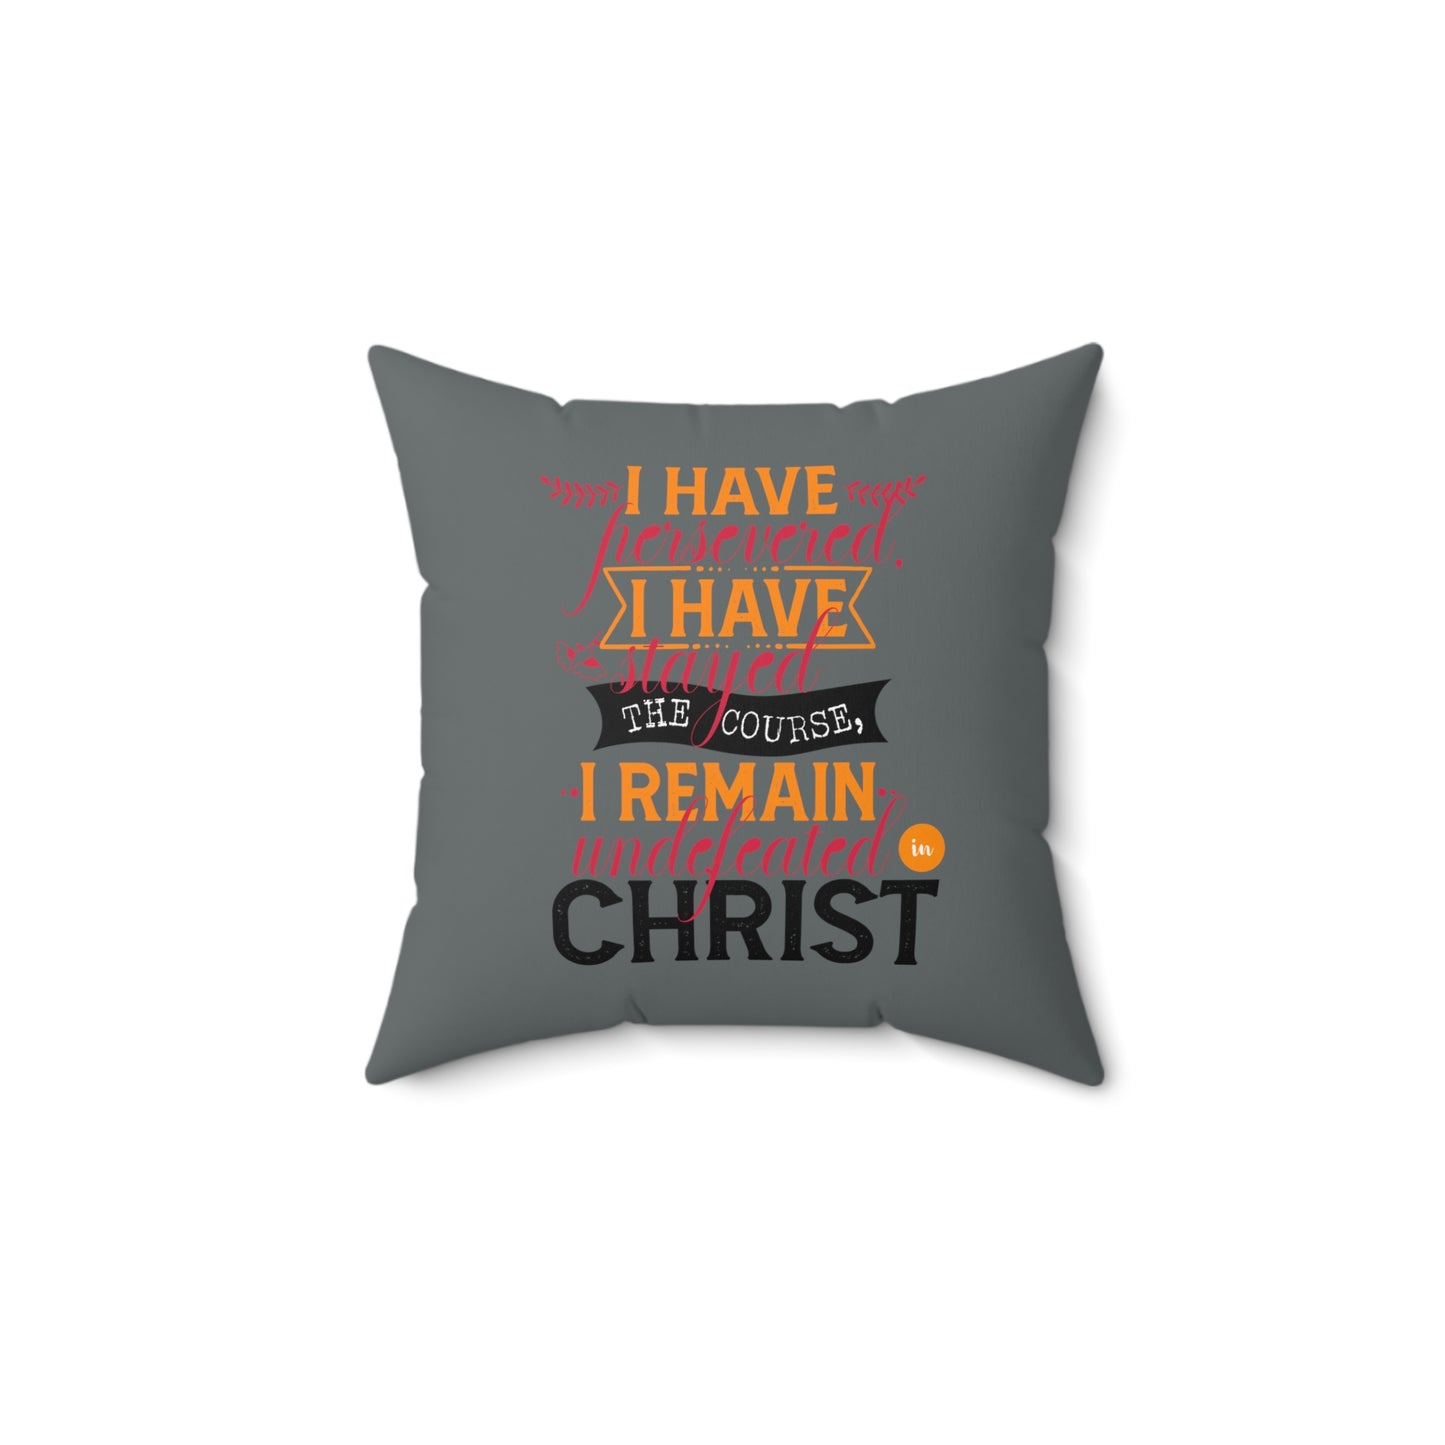 I Have Persevered I Have Stayed The Course I Remain Undefeated In Christ Pillow